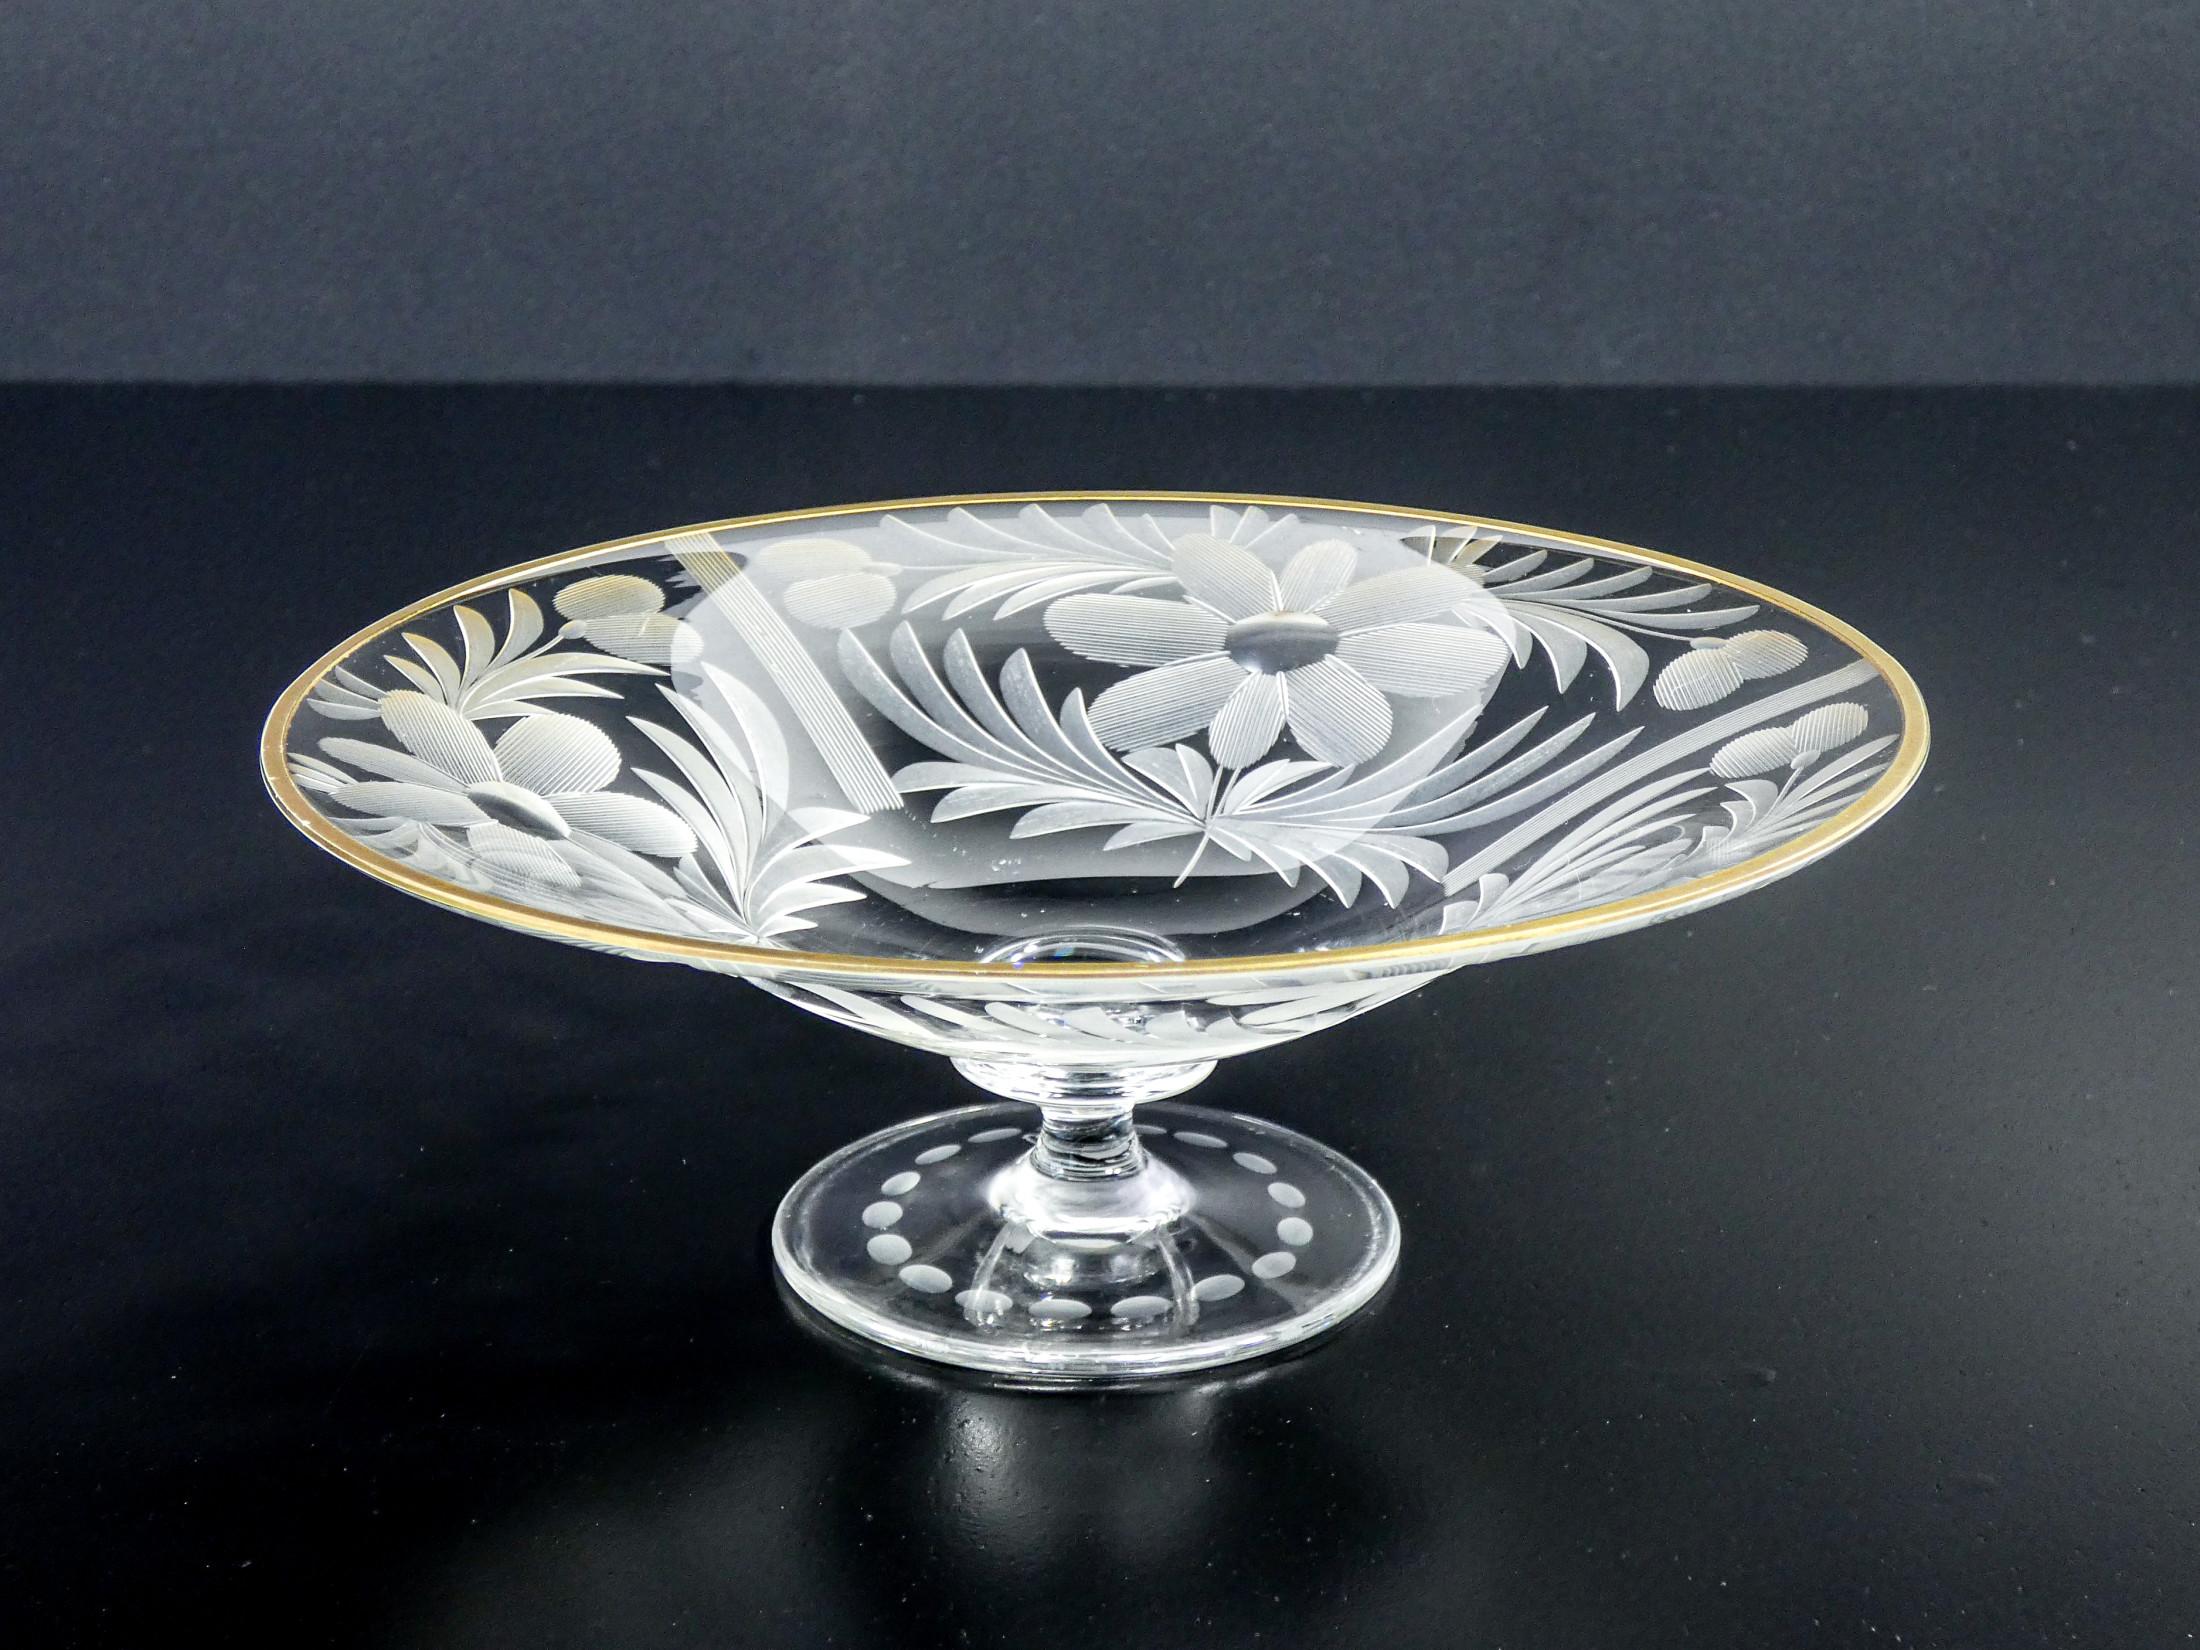 Transparent crystal cup resting on a circular base, floral decoration and leaves finely engraved on the wheel with the upper edge threaded with gold.
Signature engraved on the wheel 